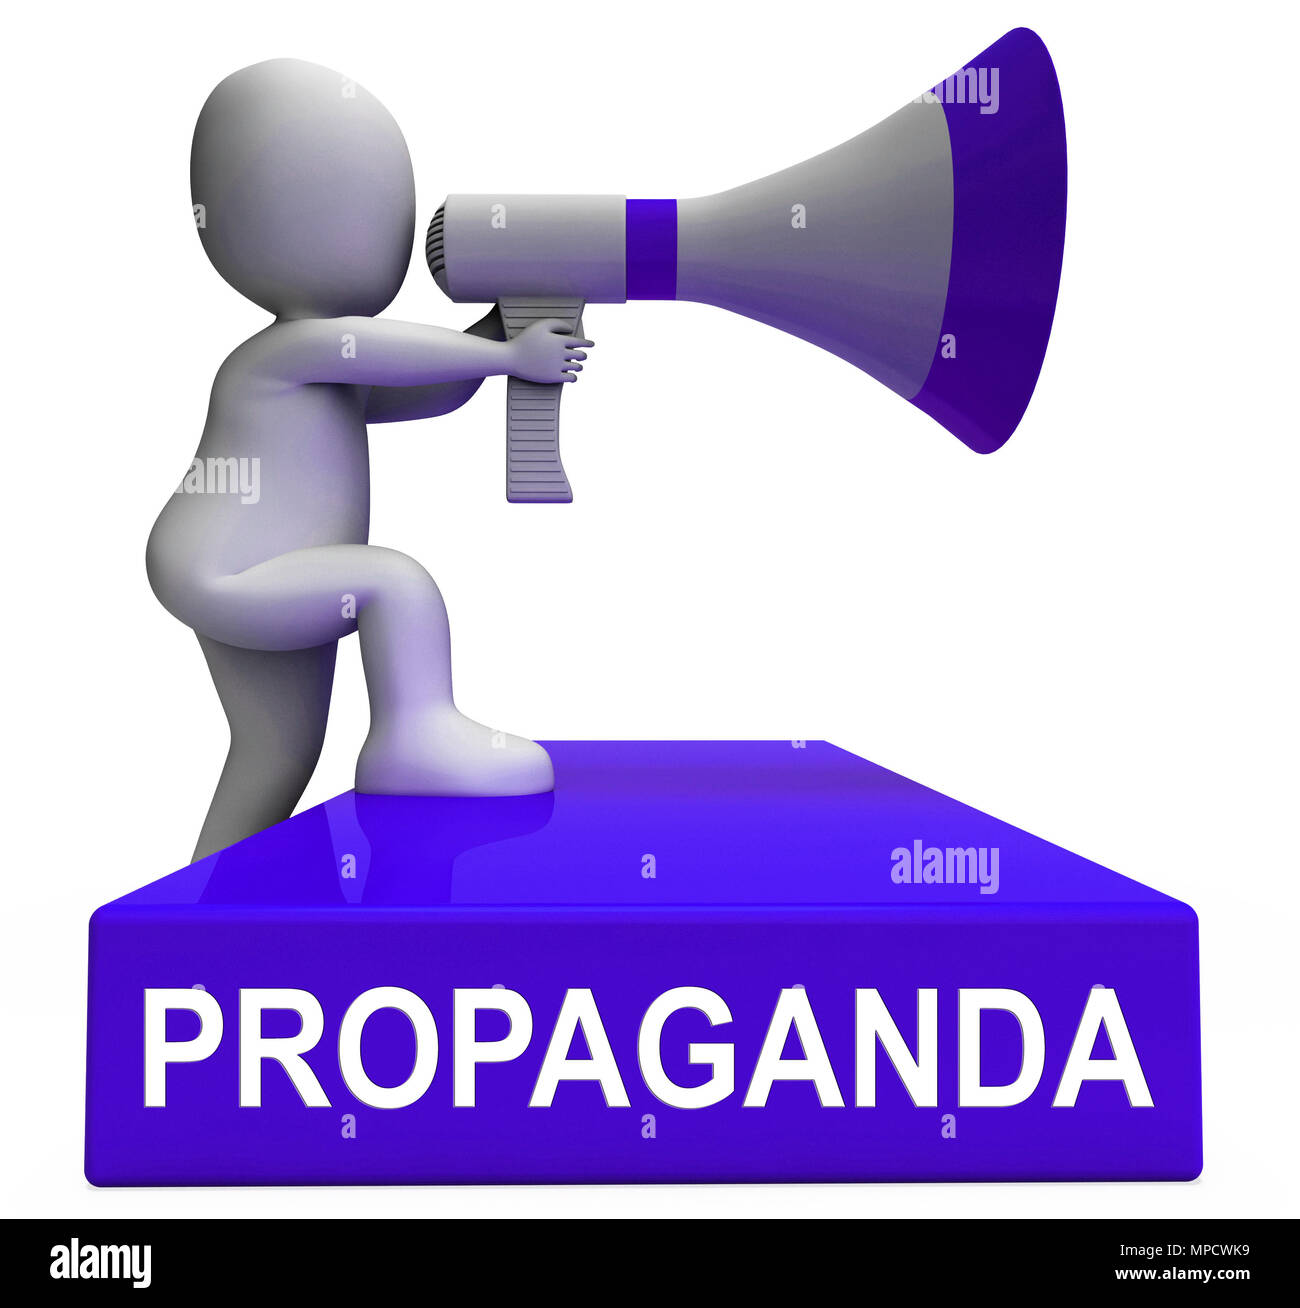 Propaganda Megaphone Message From North Korea 3d Illustration. Misinformation And Misleading Government News Hoax Manipulation From Kim Jong Un Stock Photo